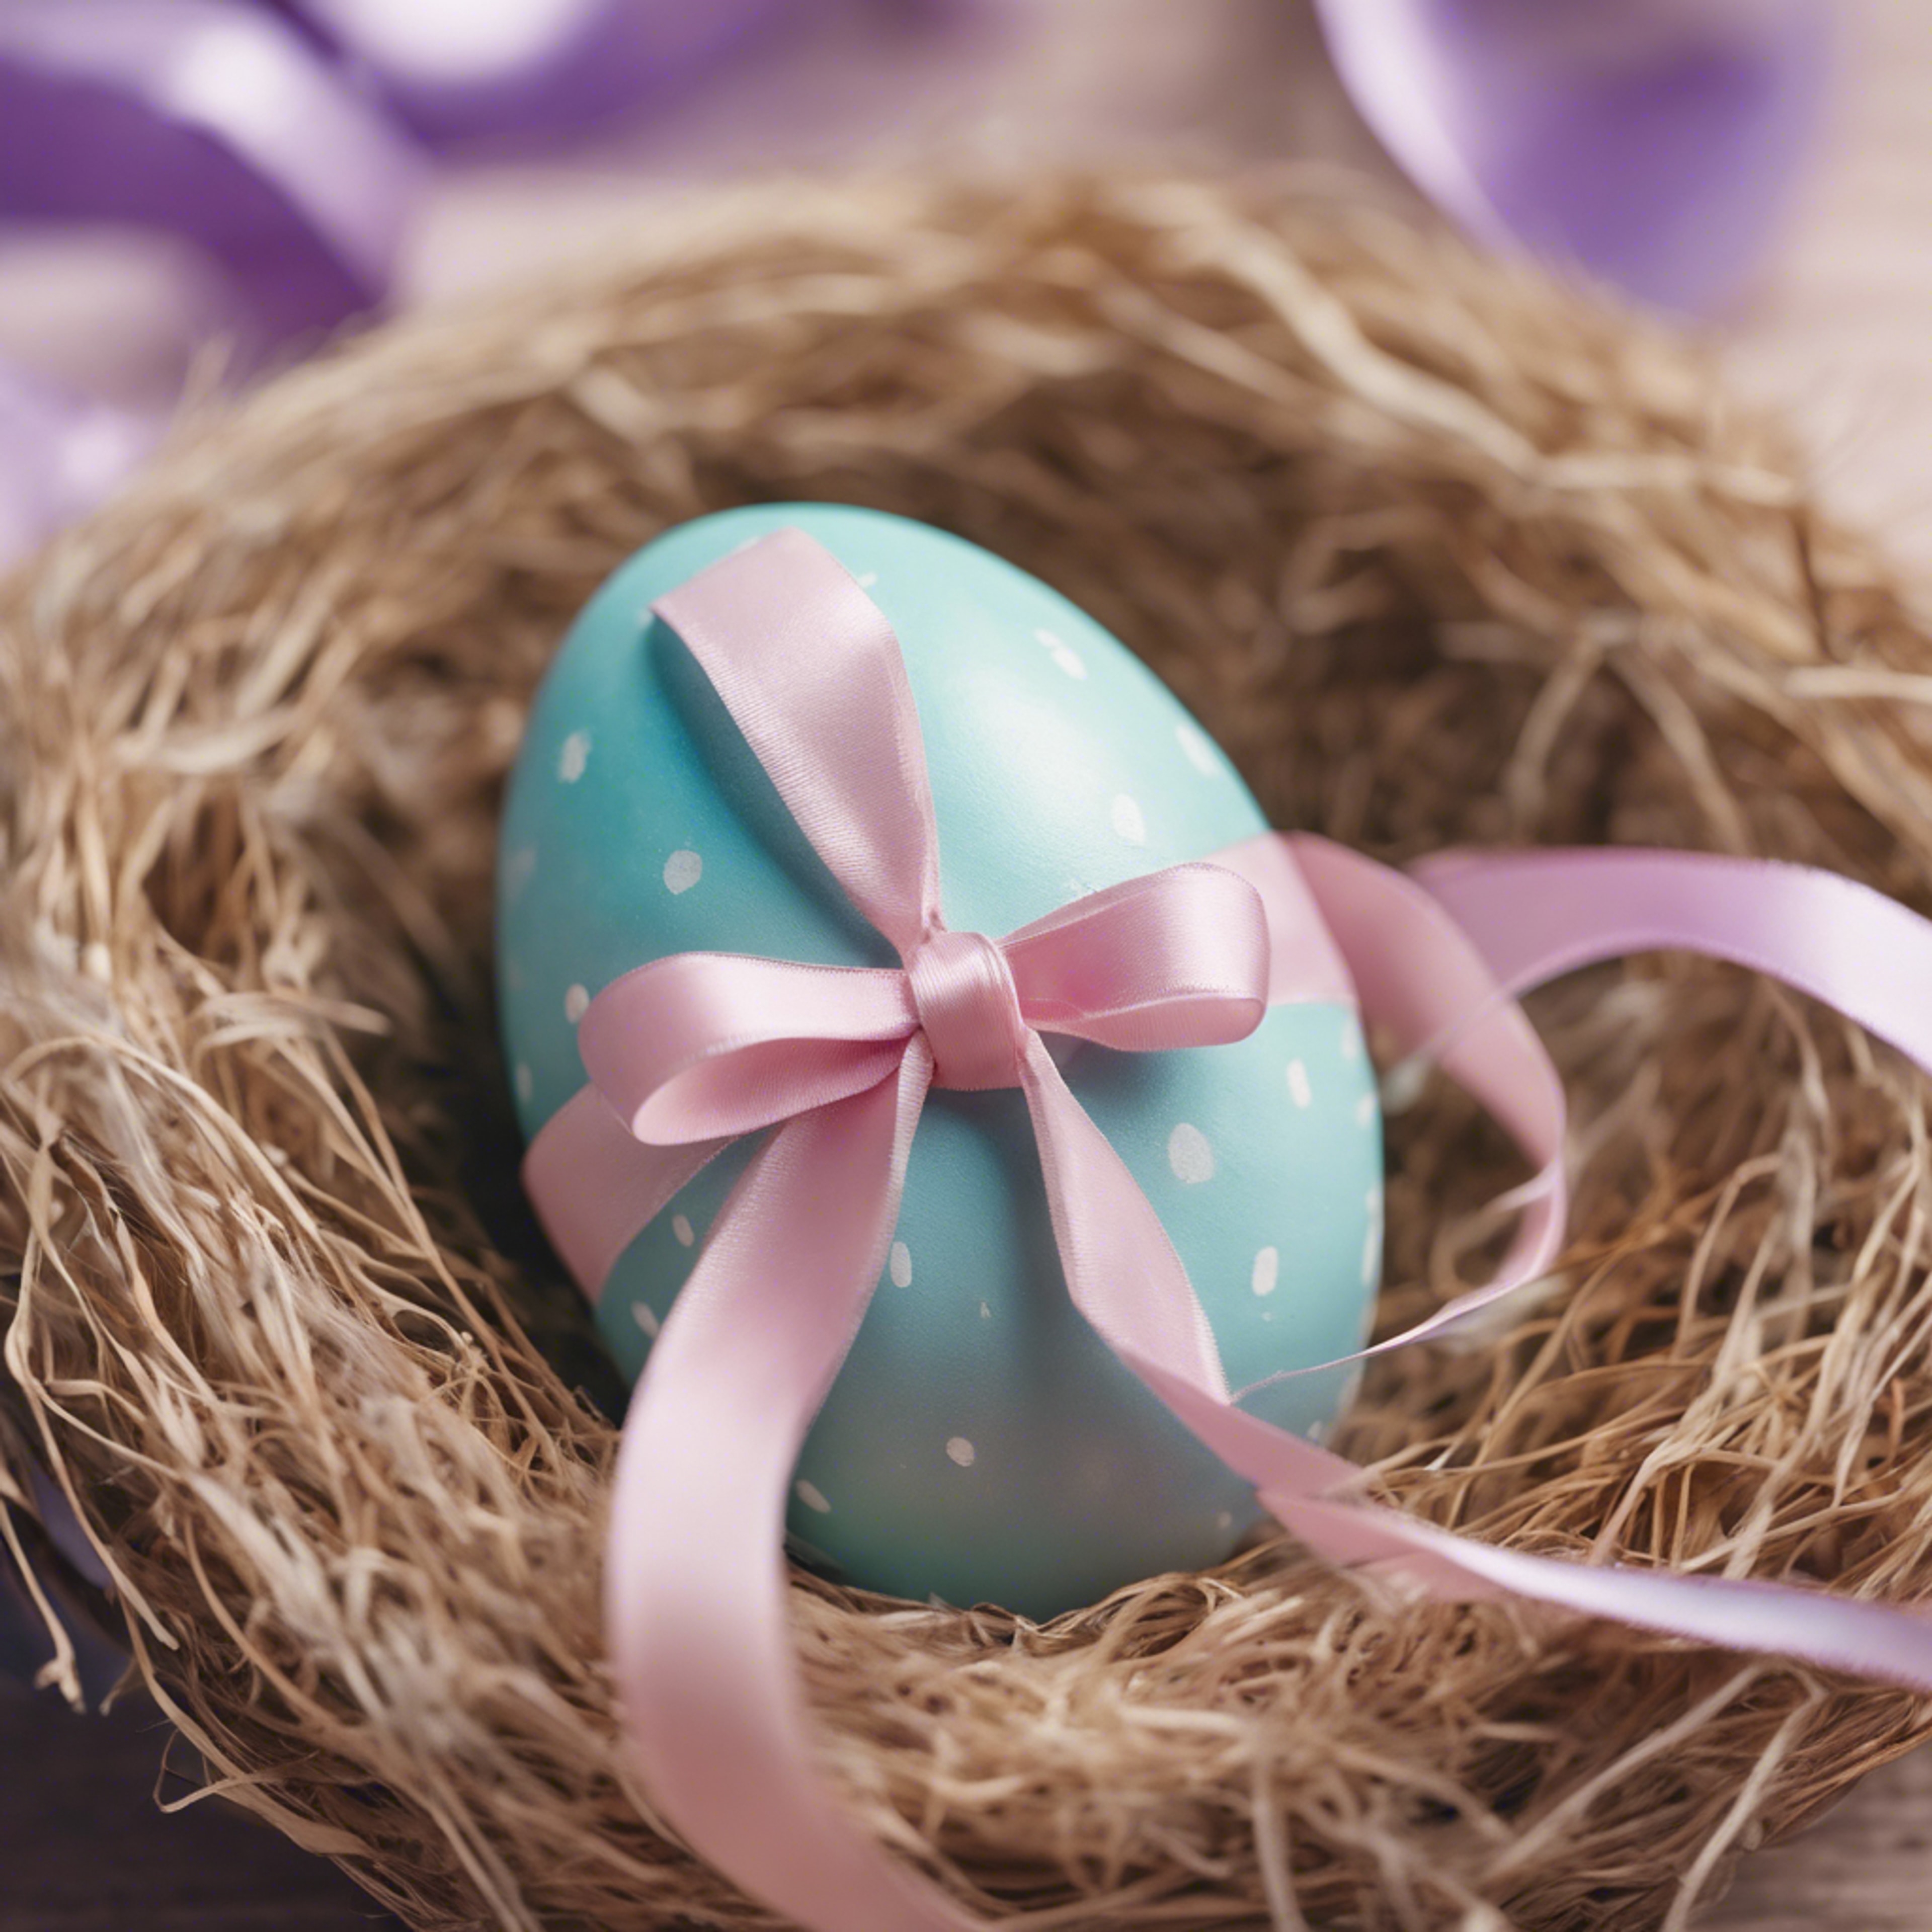 Close-up image of a pastel-colored Easter egg with ribbon details, on a nest. Tapéta[582f95aee8b94a49b4e5]